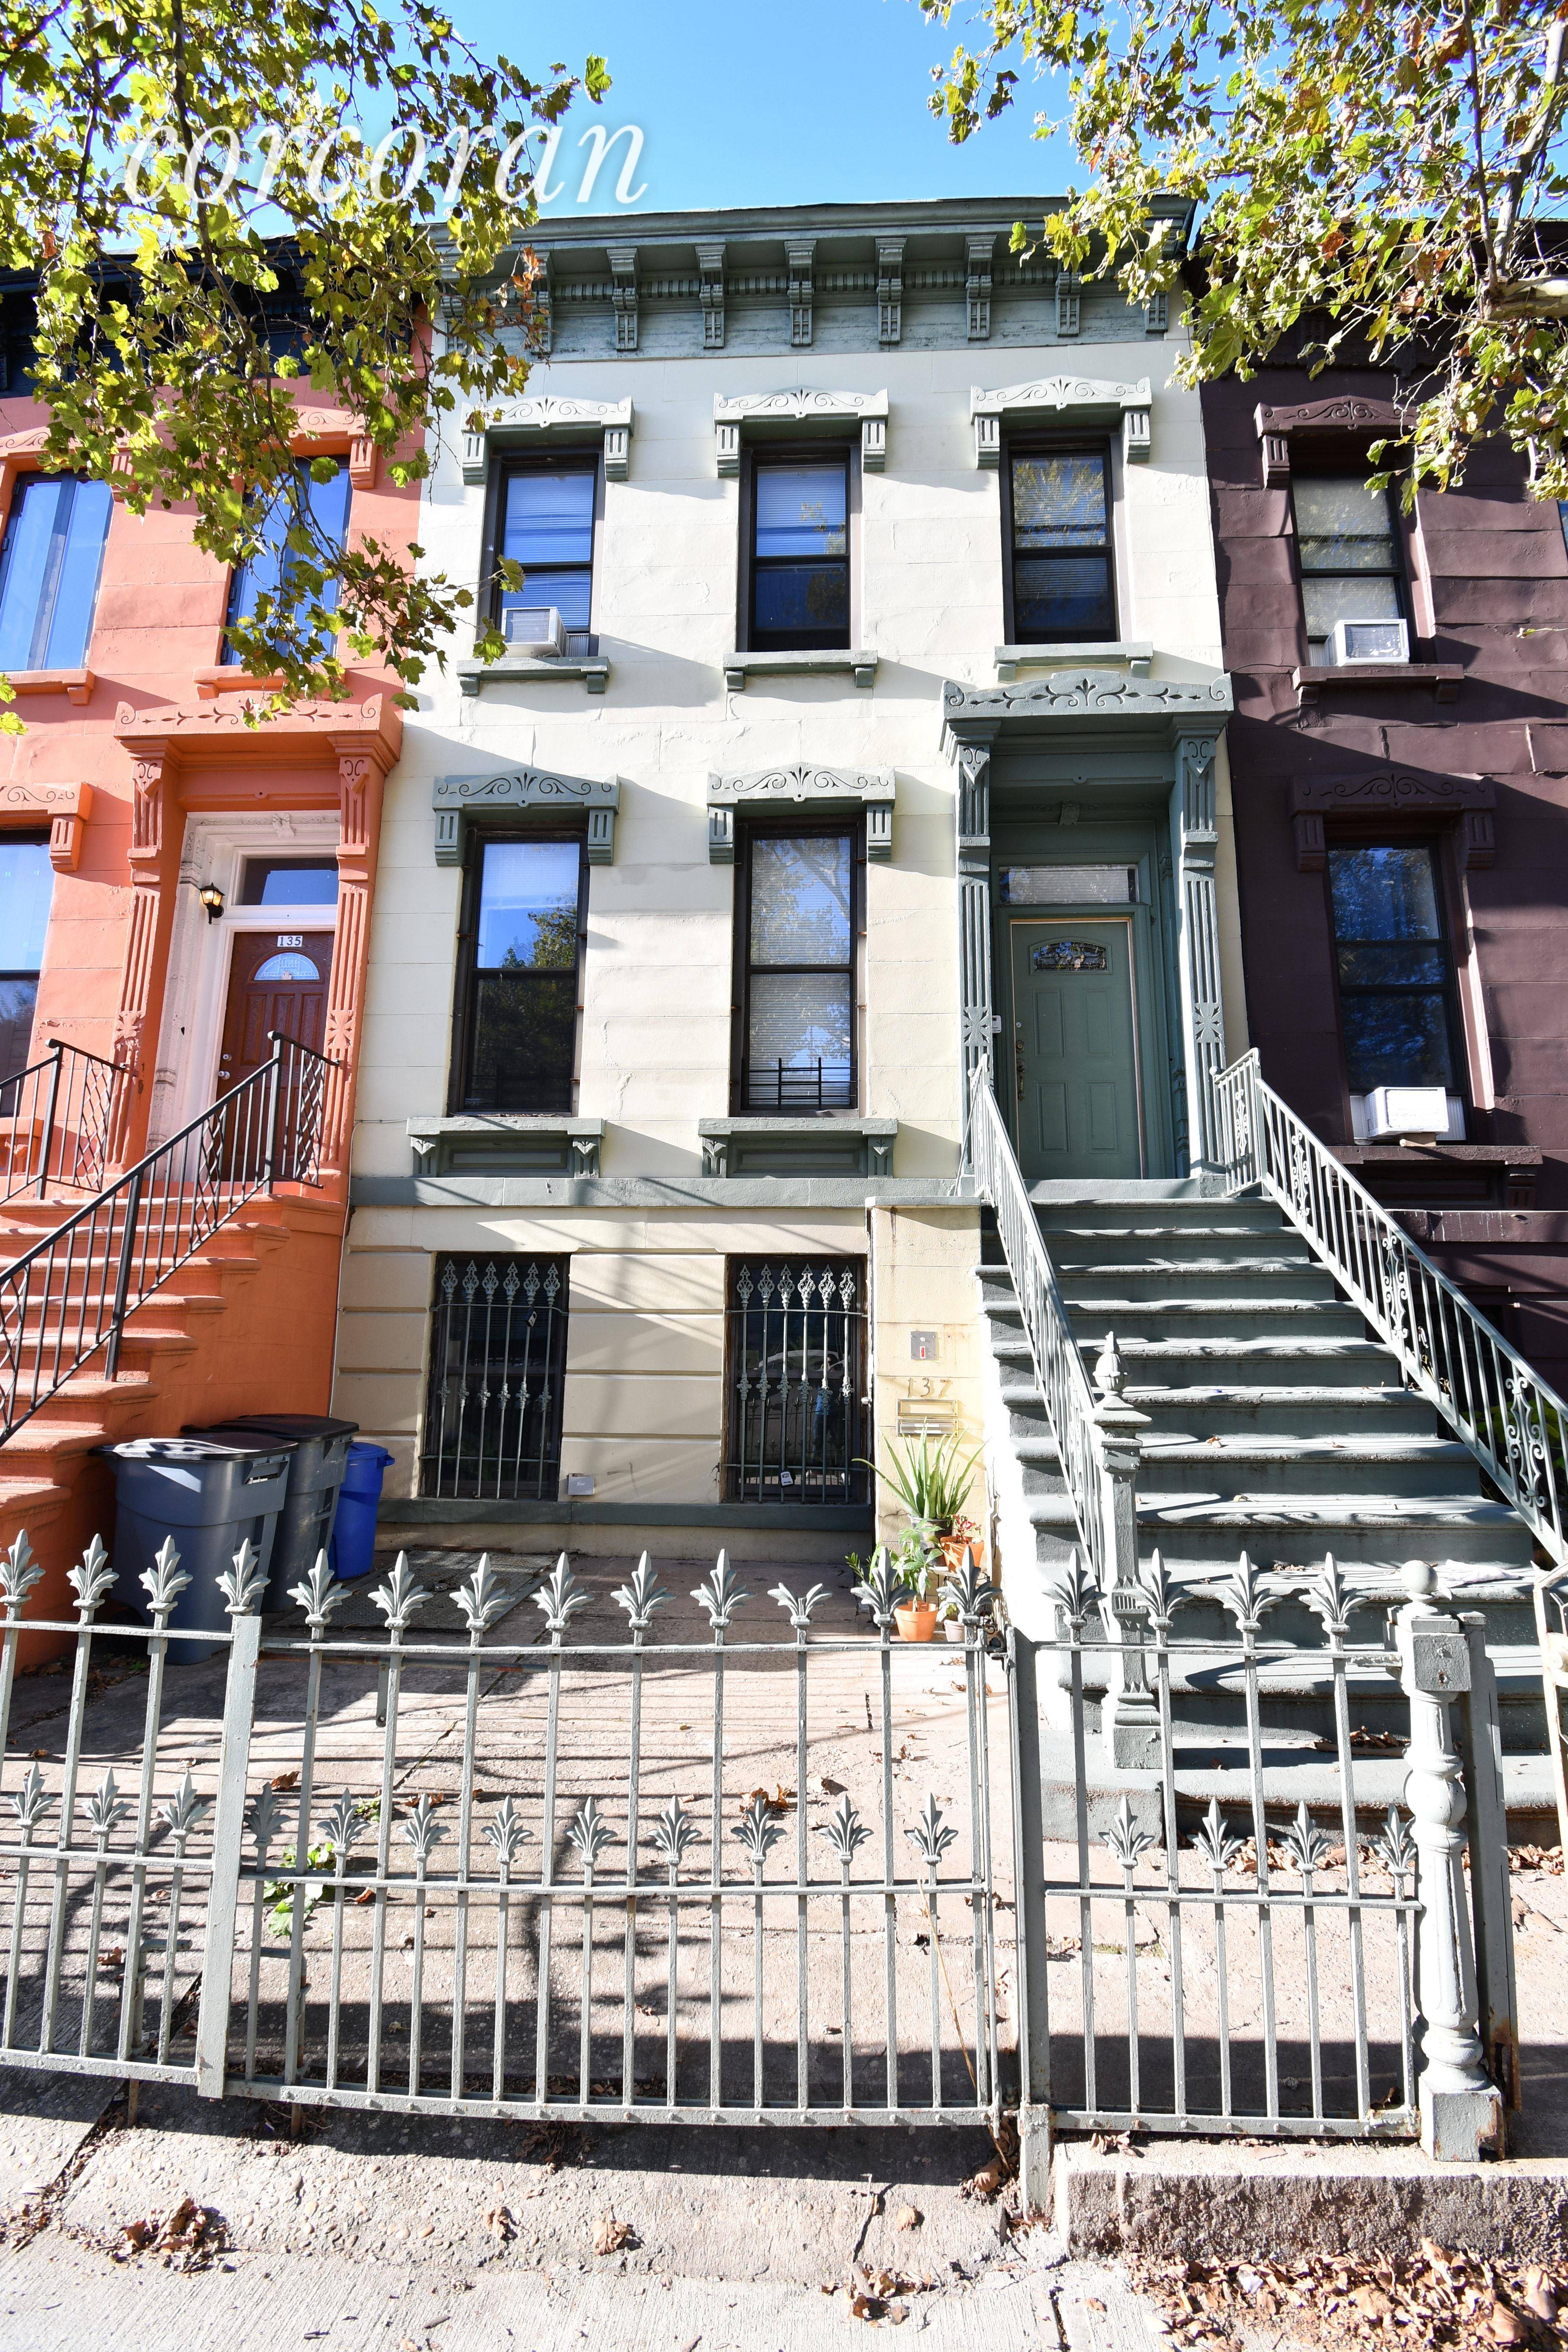 Contract Signed Welcome to this newly remodeled Bed Stuy 2 family Brownstone located on a picture perfect block.